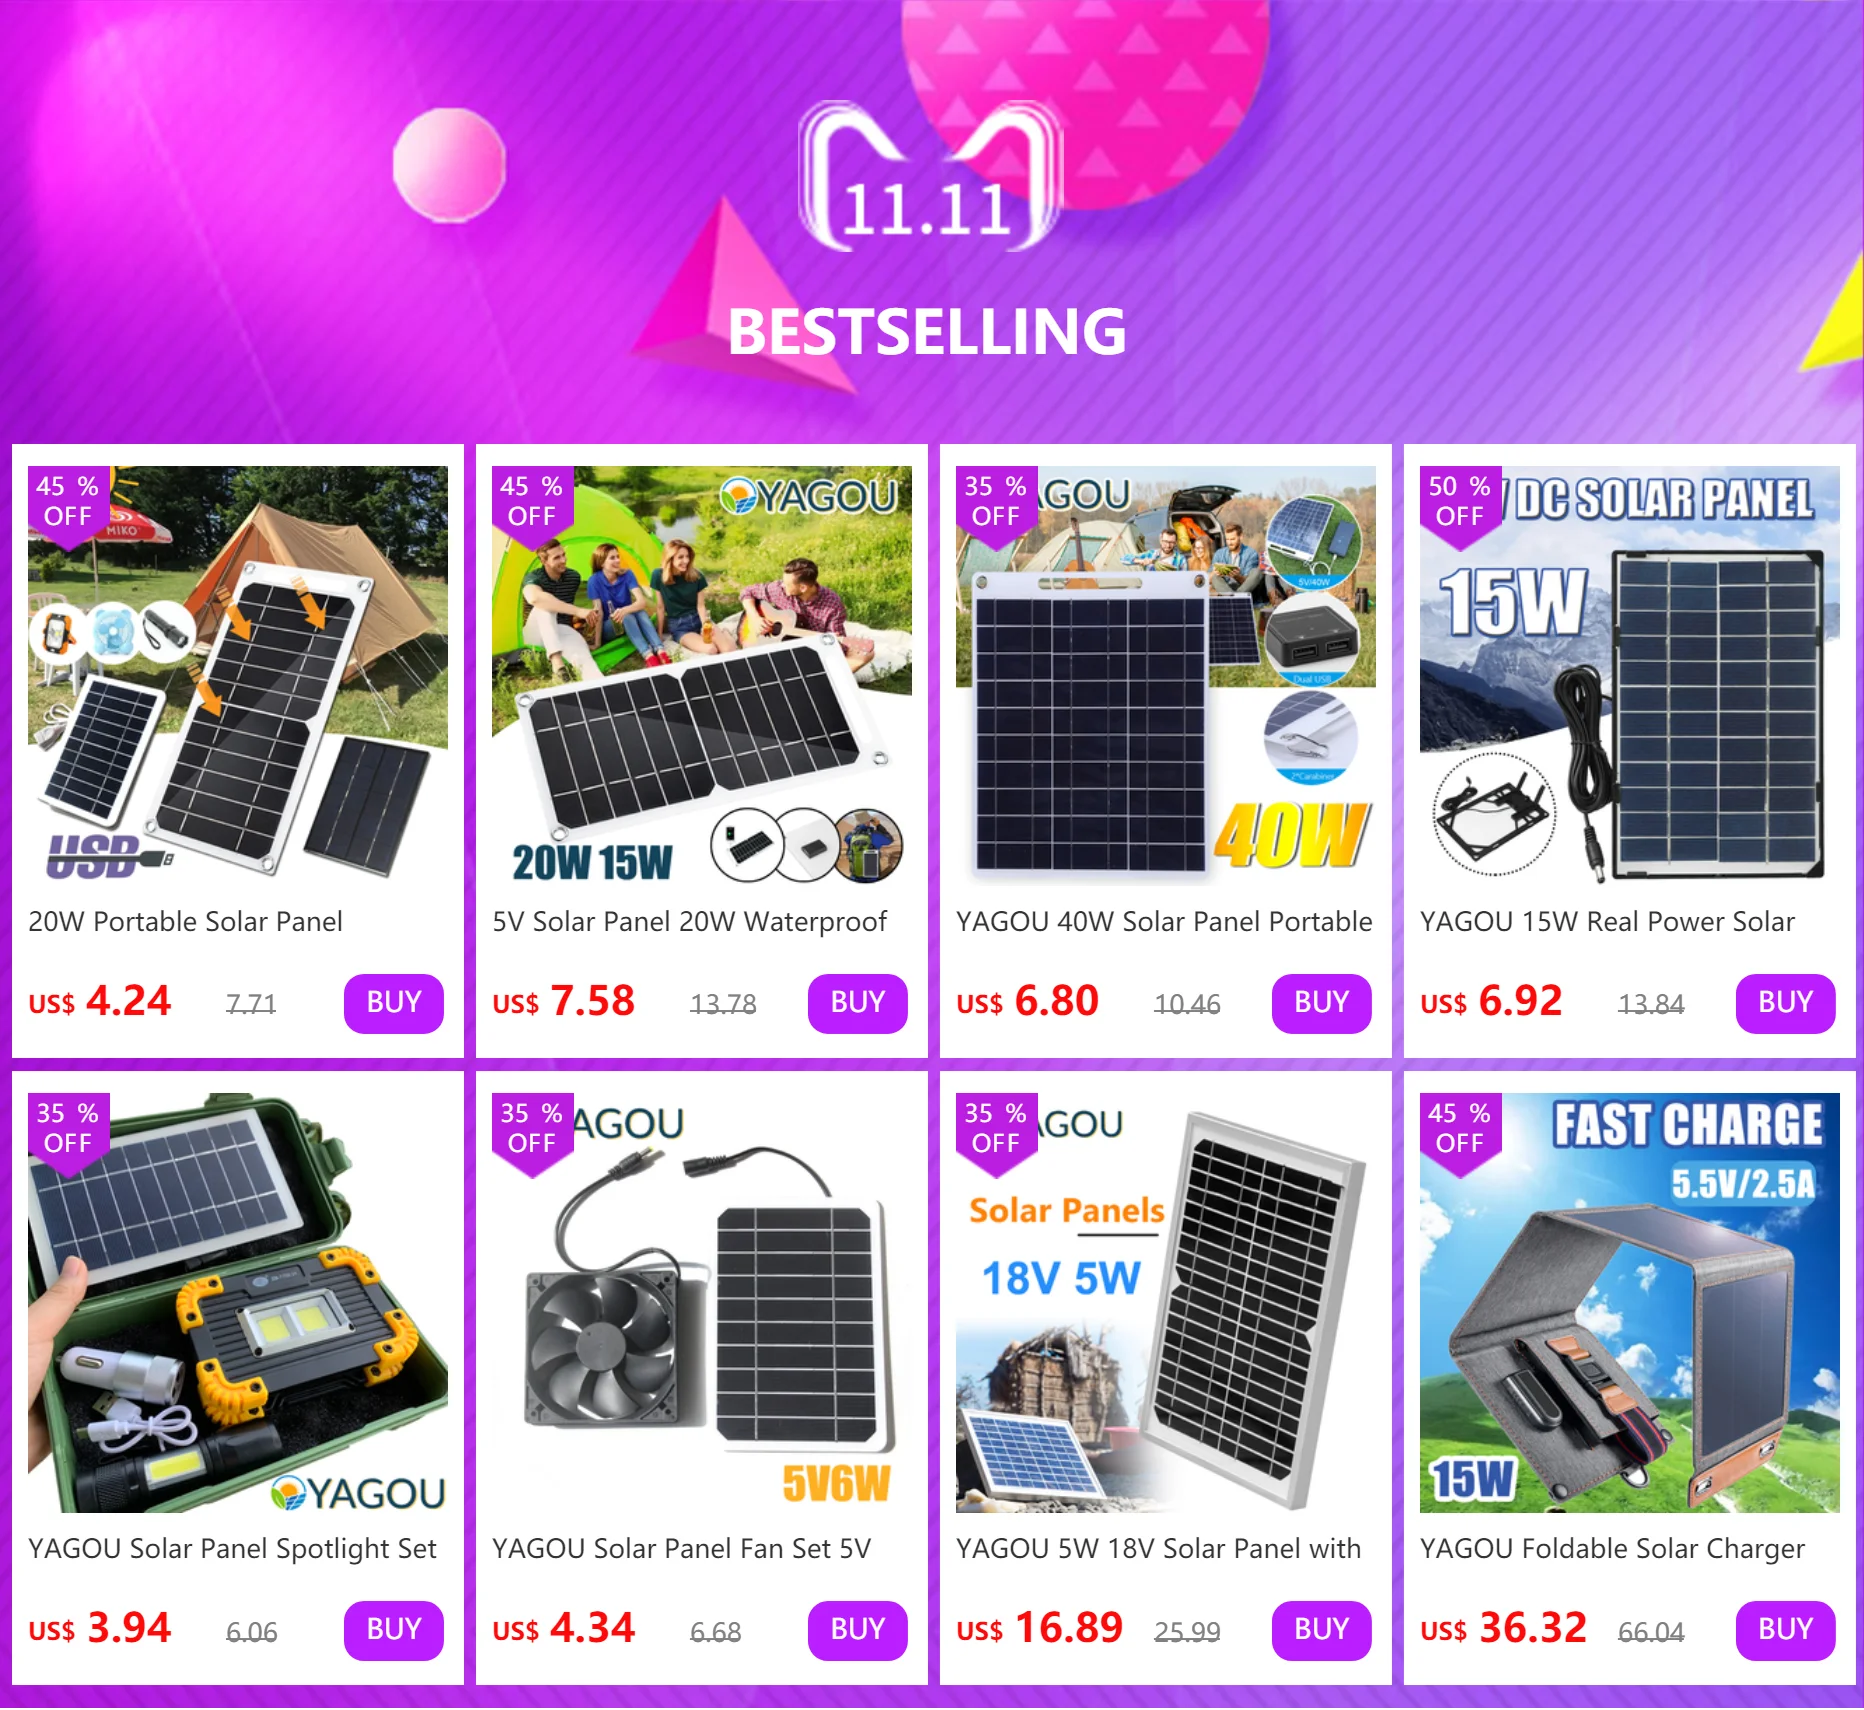 20W Portable Solar Panel, Portable solar charger for power banks, batteries, and devices.